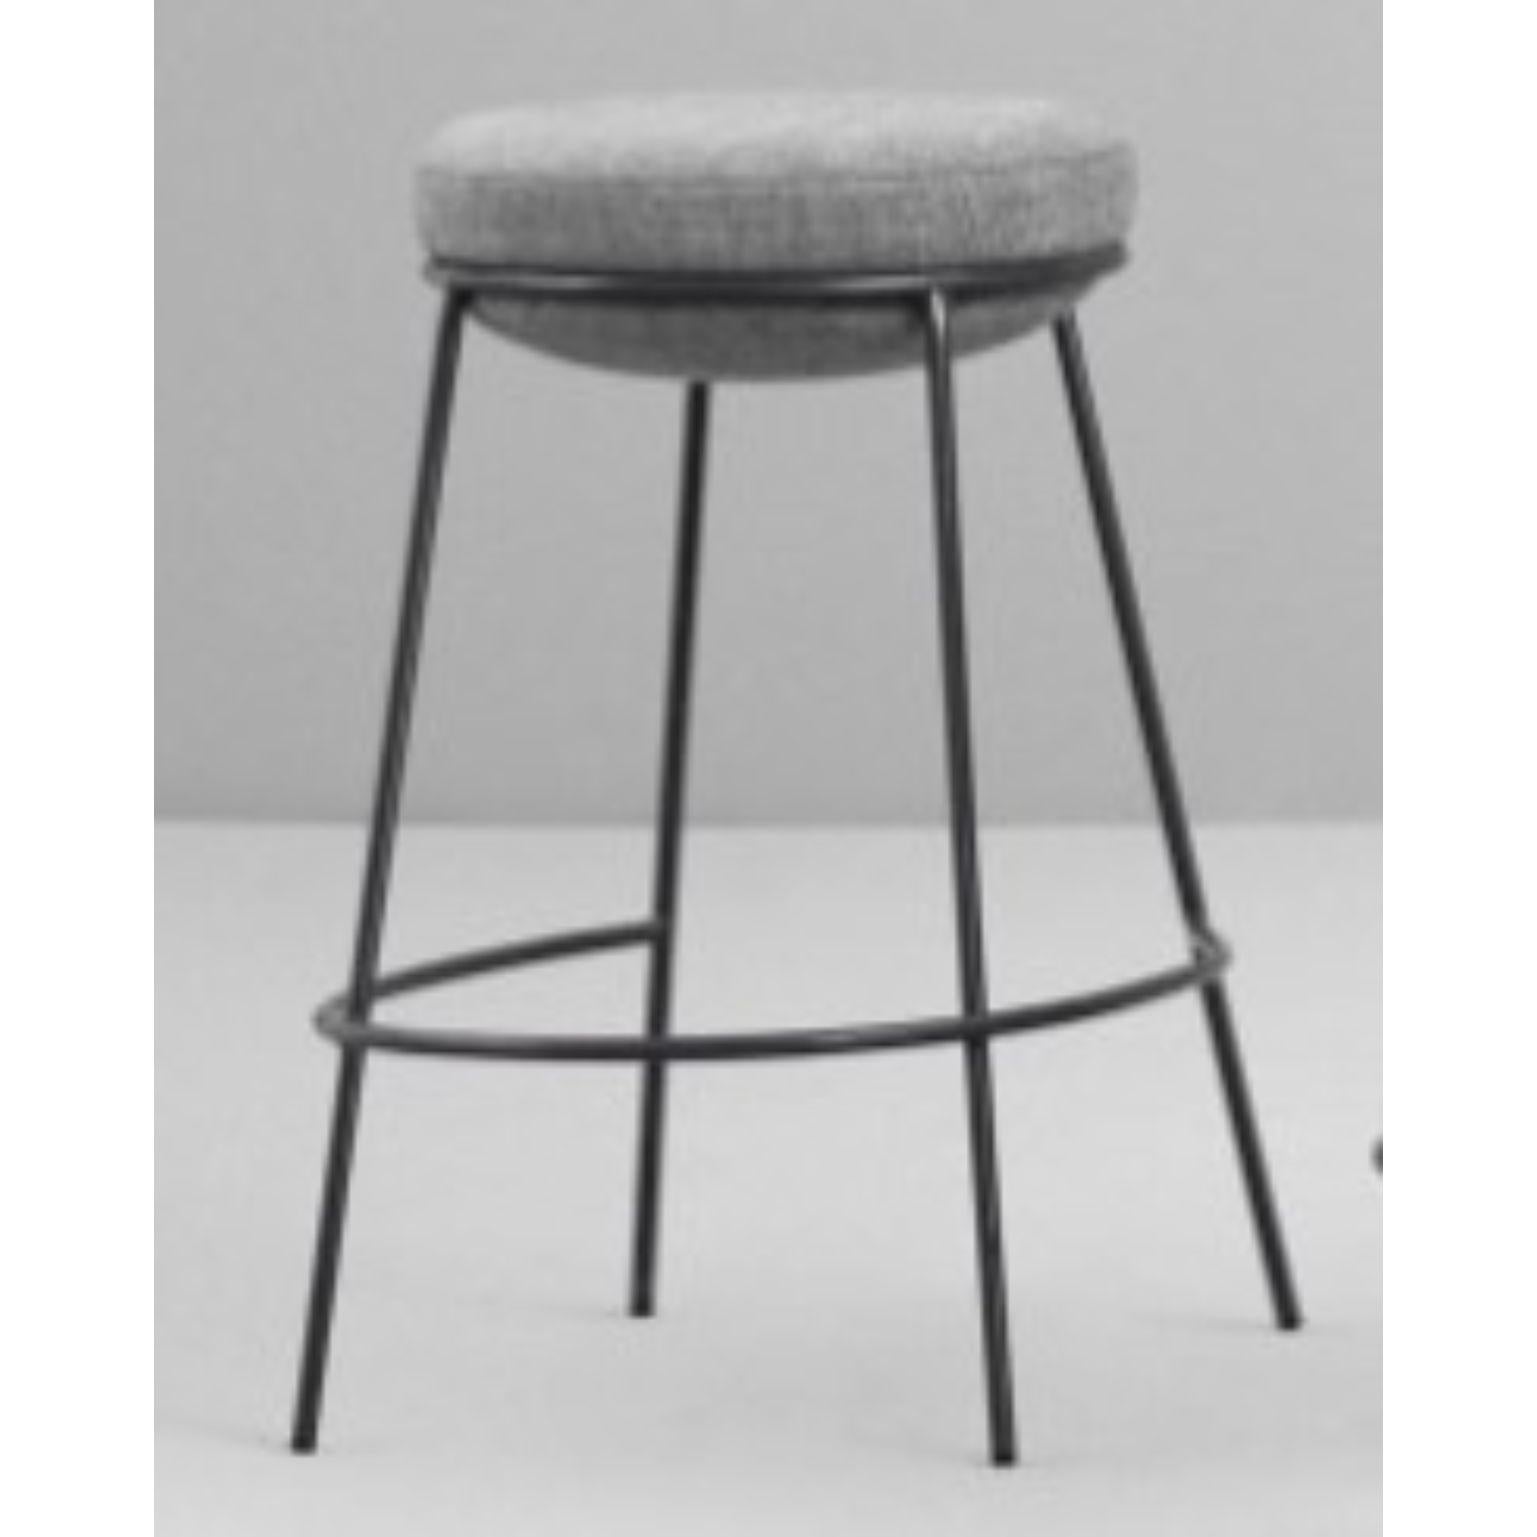 Pair of Nest Stools without Backrest by Pepe Albargues
Dimensions: W48, D57, H92, Seat74
Materials: Iron structure and MDF board
Foam CMHR (high resilience and flame retardant) for all our cushion filling systems
Painted or chromed legs
Copper